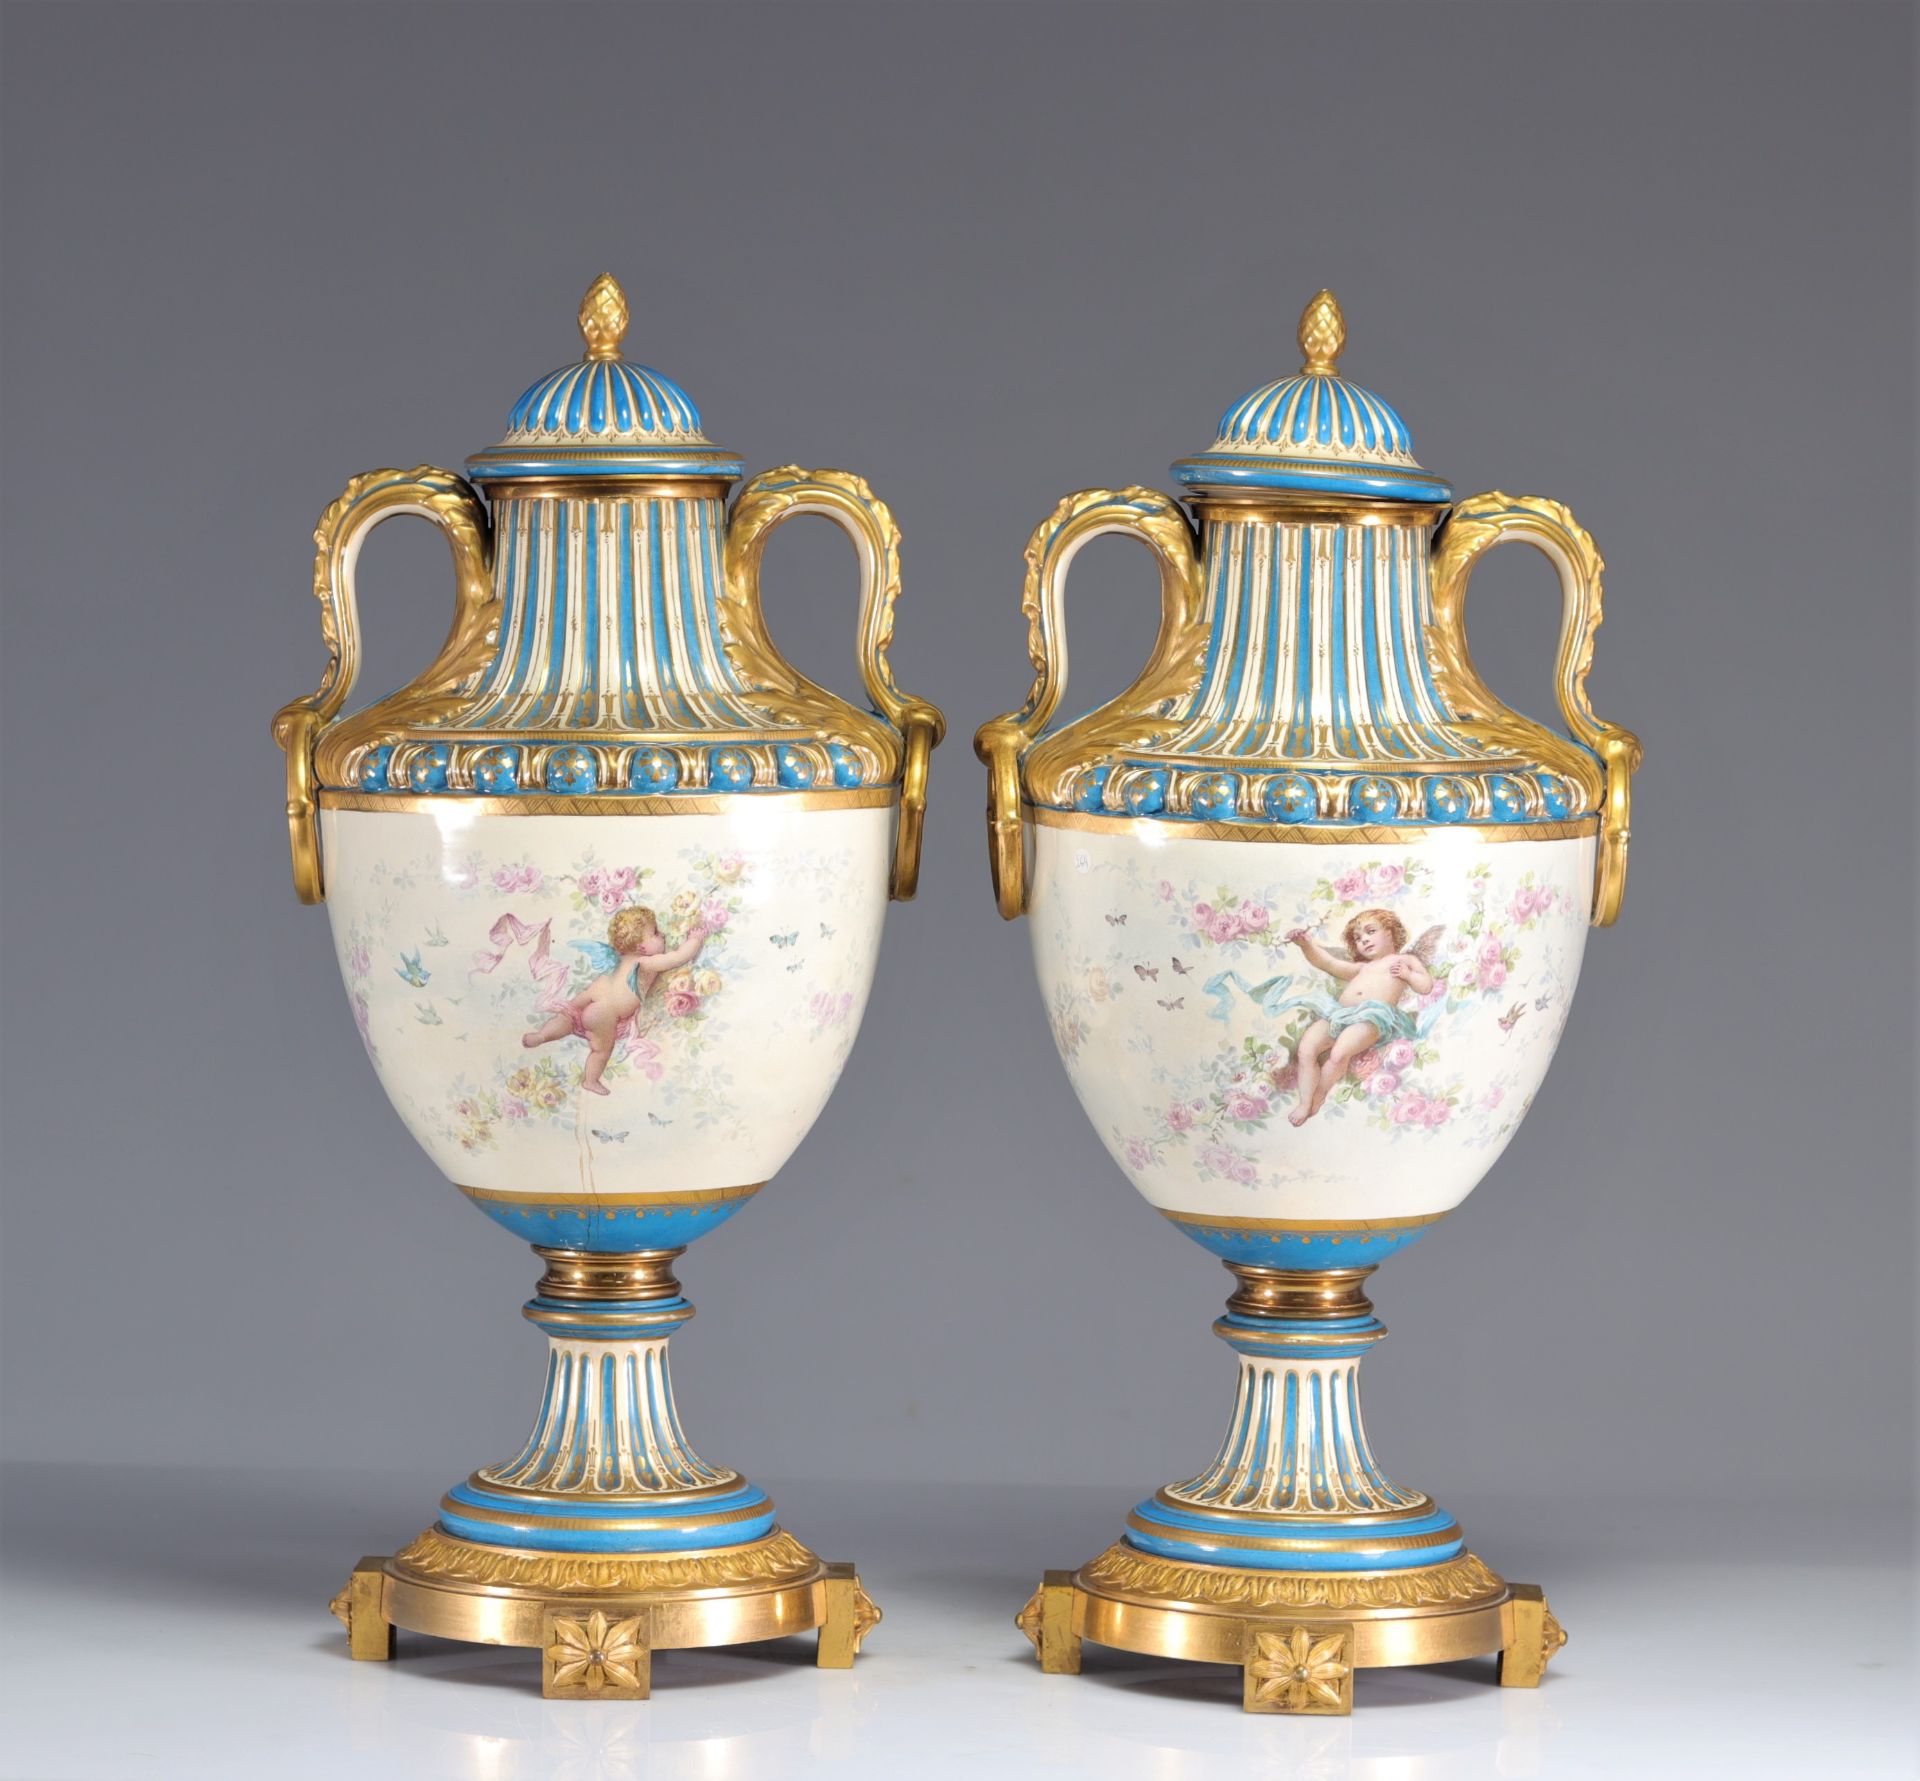 Sevres imposing pair of vases decorated with romantic scenes and cupids in gilded bronze - Image 4 of 8